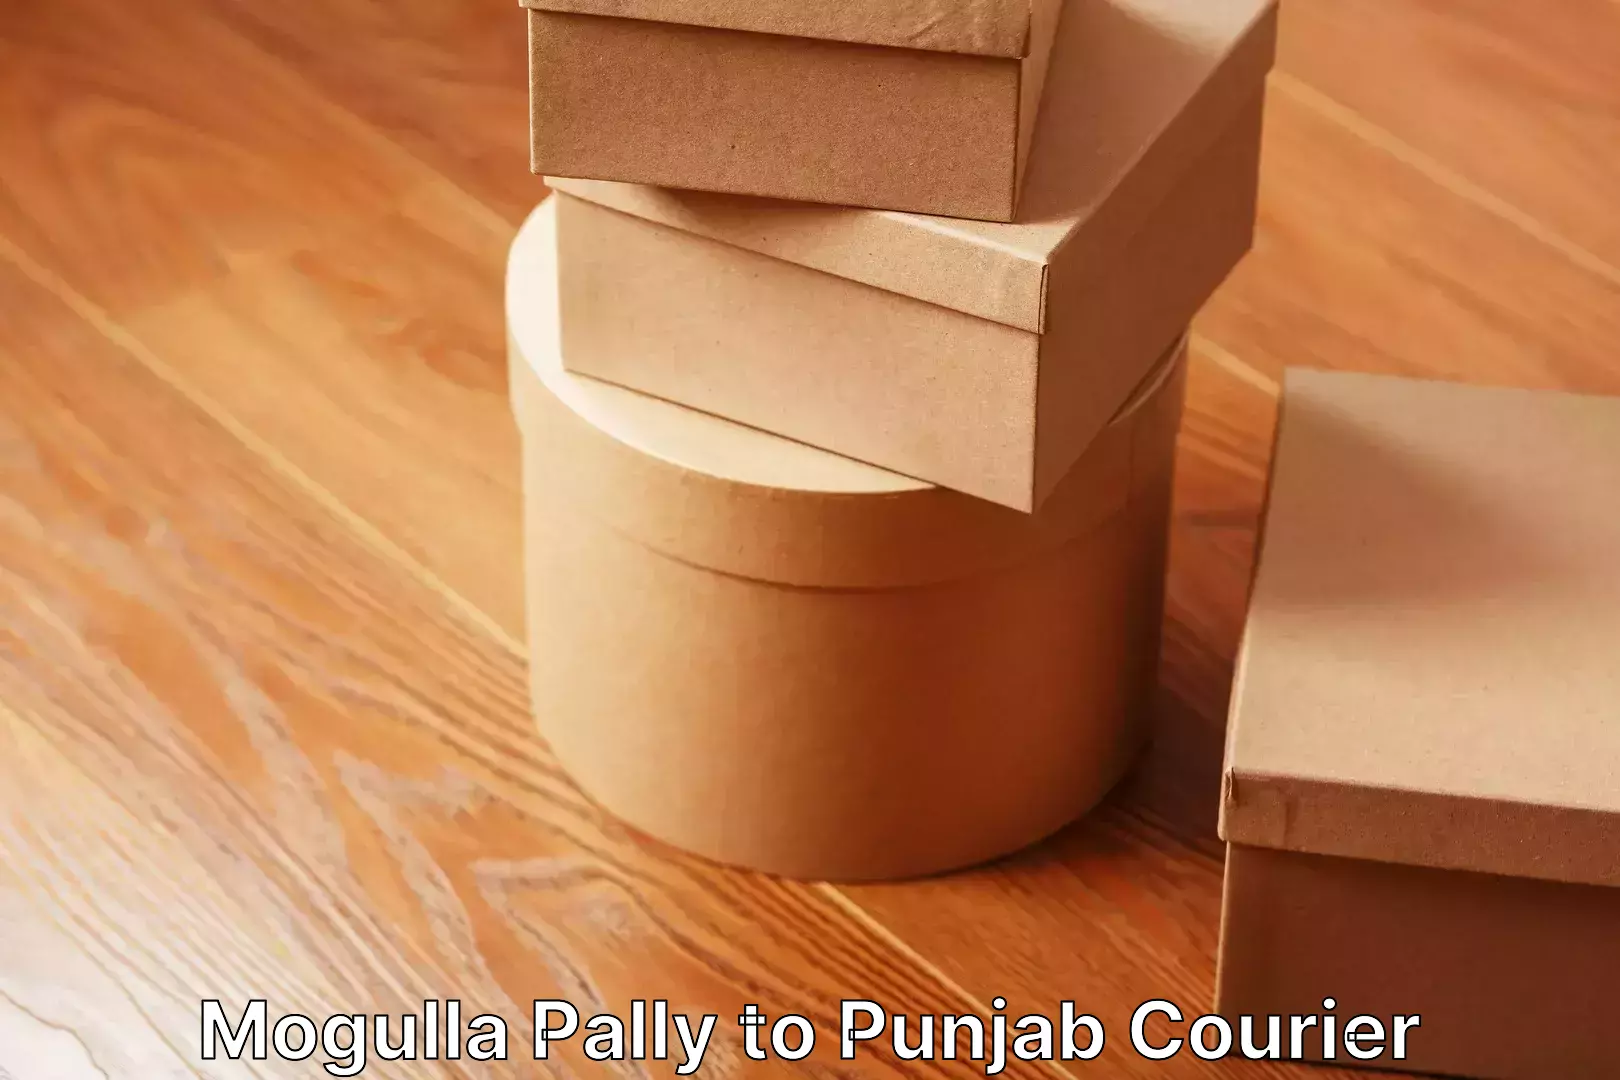 Dependable moving services in Mogulla Pally to Punjab